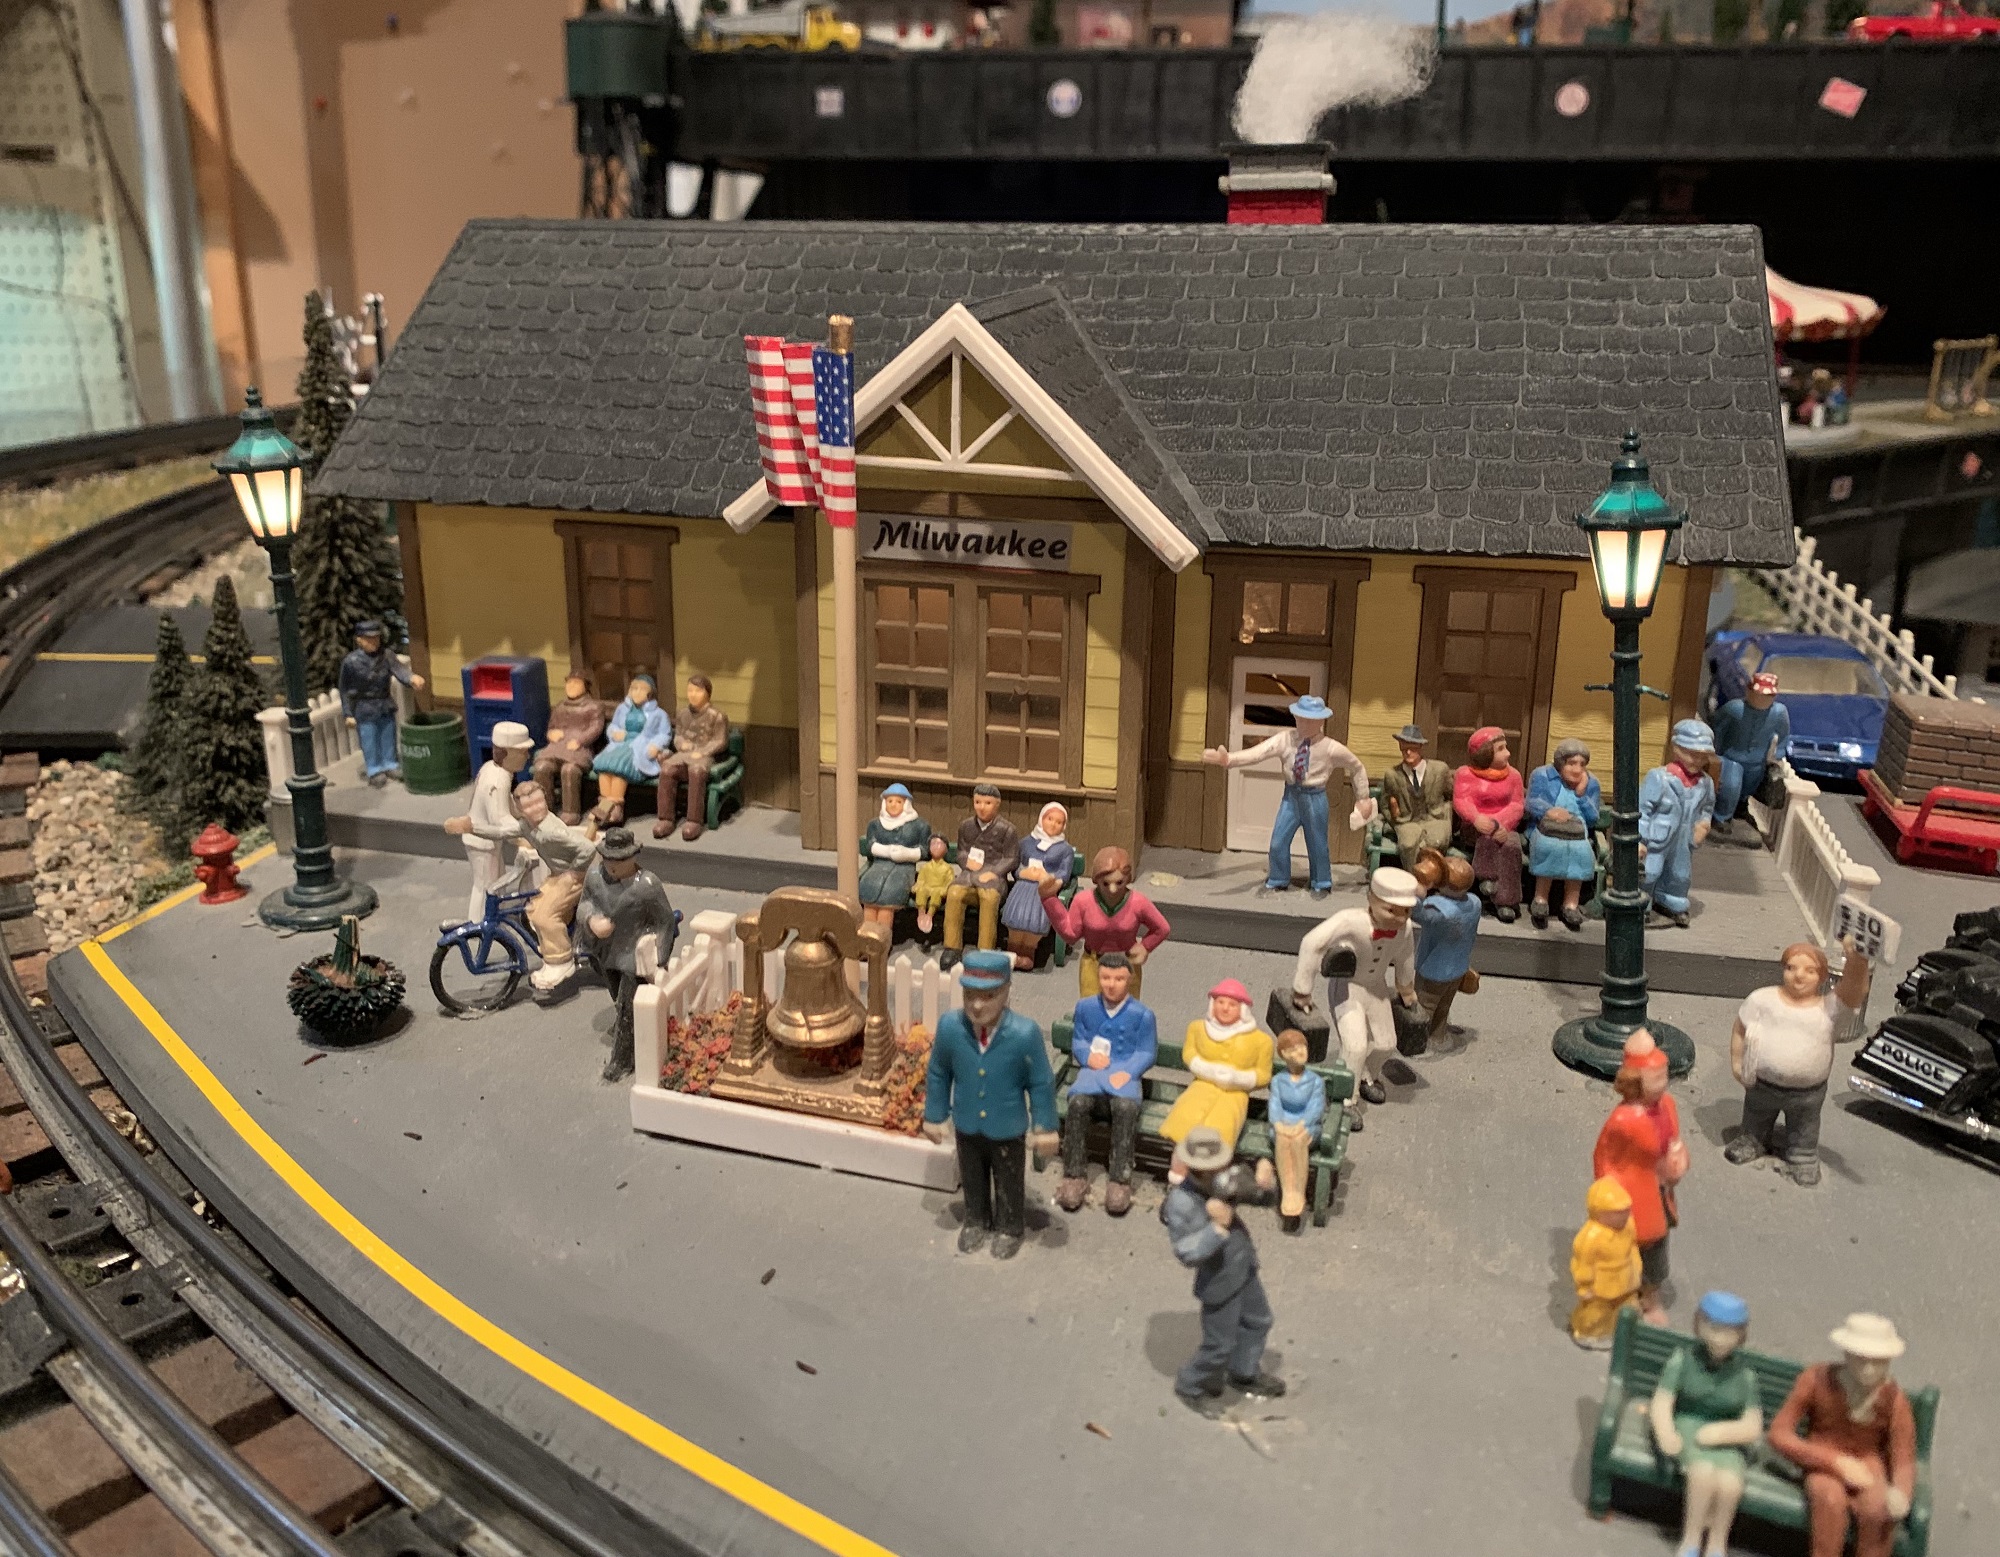 A model of a Milwaukee train station at the Lionel Railroad Club. (Photo by Jane Hampden)